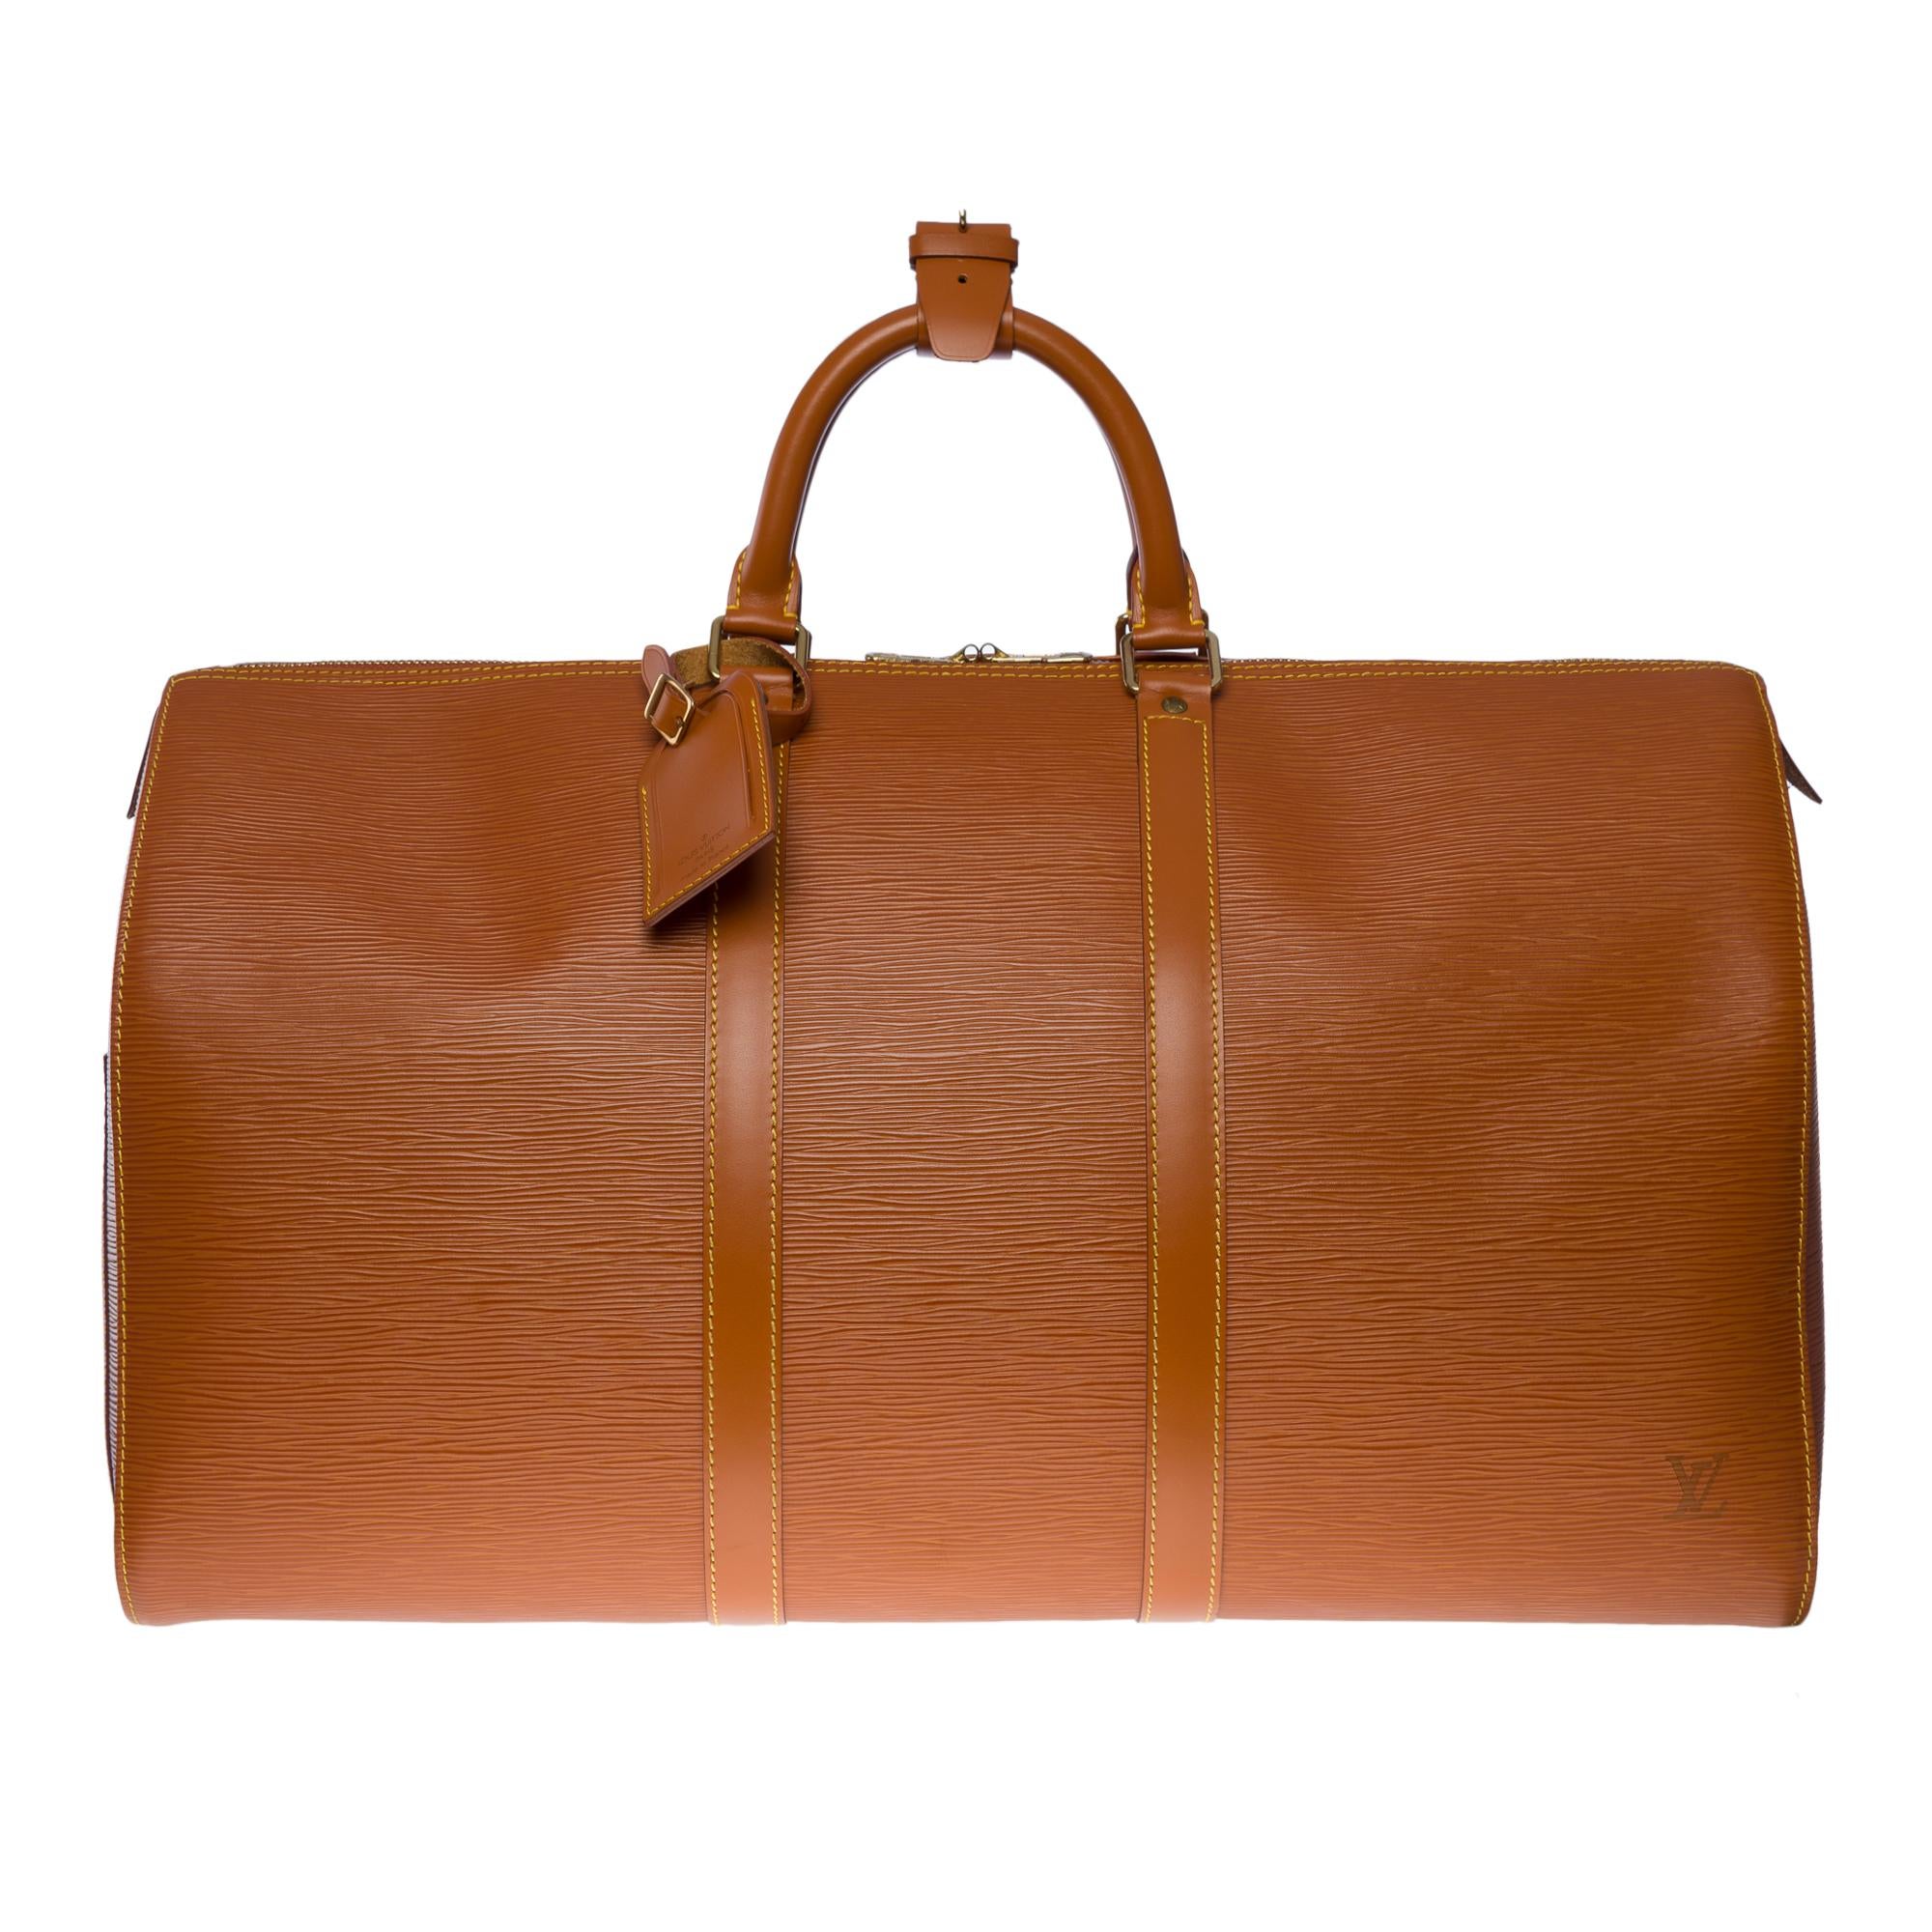 The Very Chic Louis Vuitton Keepall 50 Travel Bag in Cognac Epi Leather, double slider zipper, double cognac leather handle and hand-carry
Zip closure
A side patch pocket
Cognac suede inner lining
Signature “LOUIS VUITTON, Made in